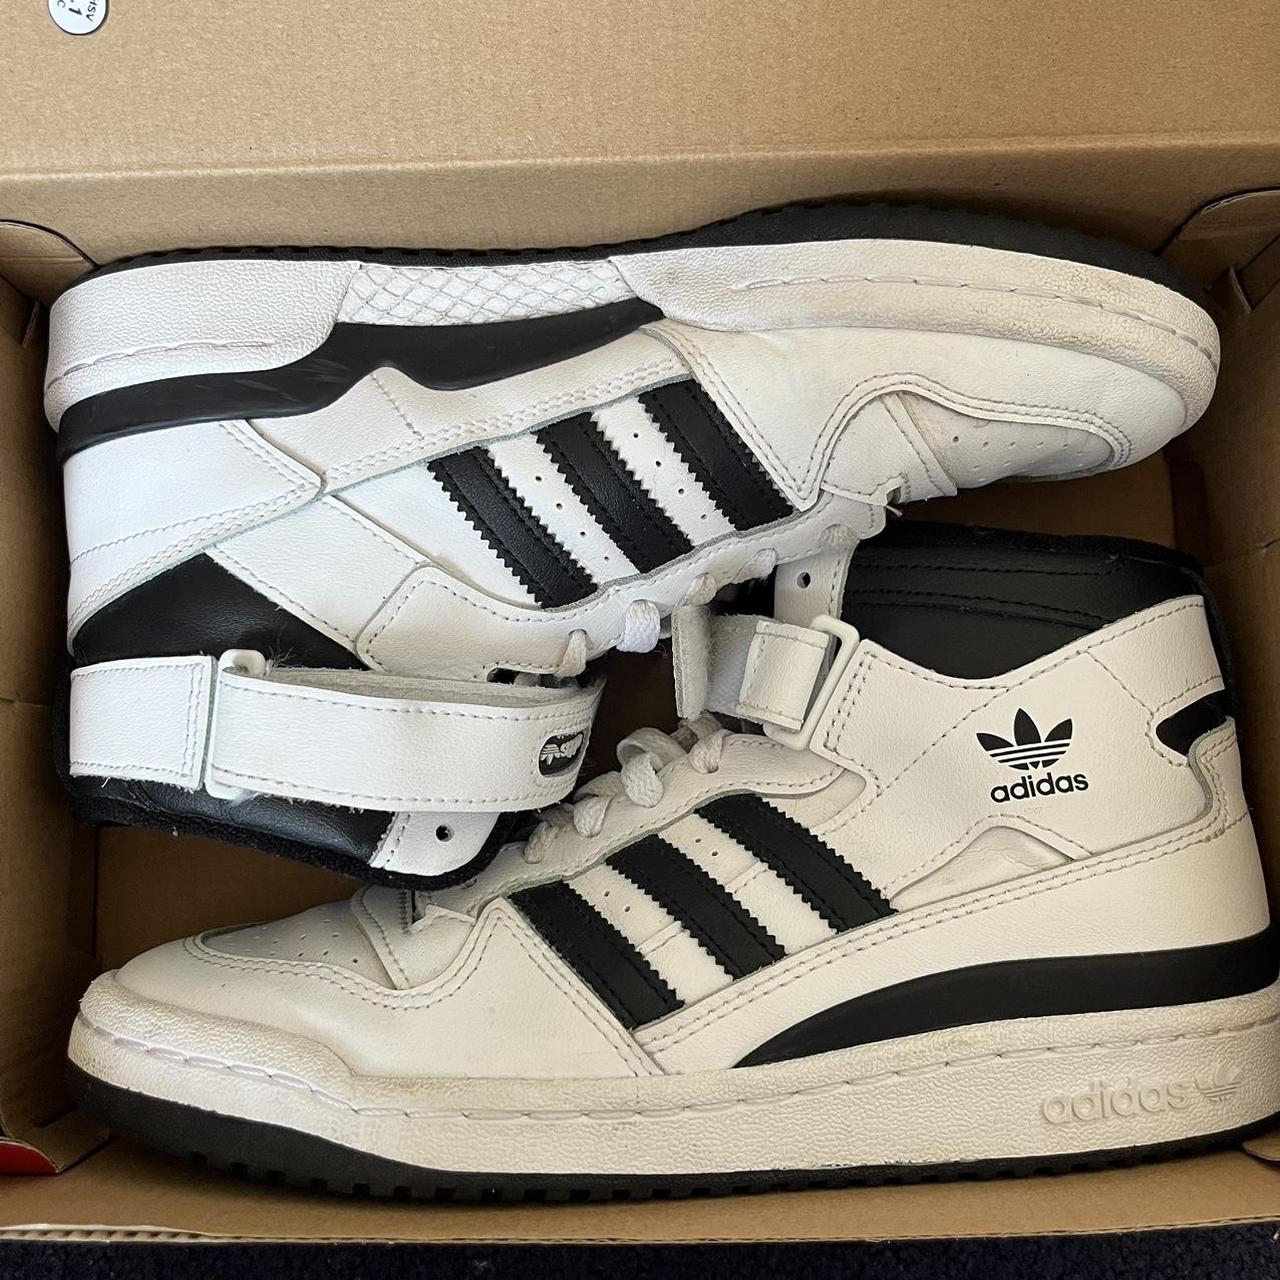 Black and white adidas high top forums. Only worn a... - Depop